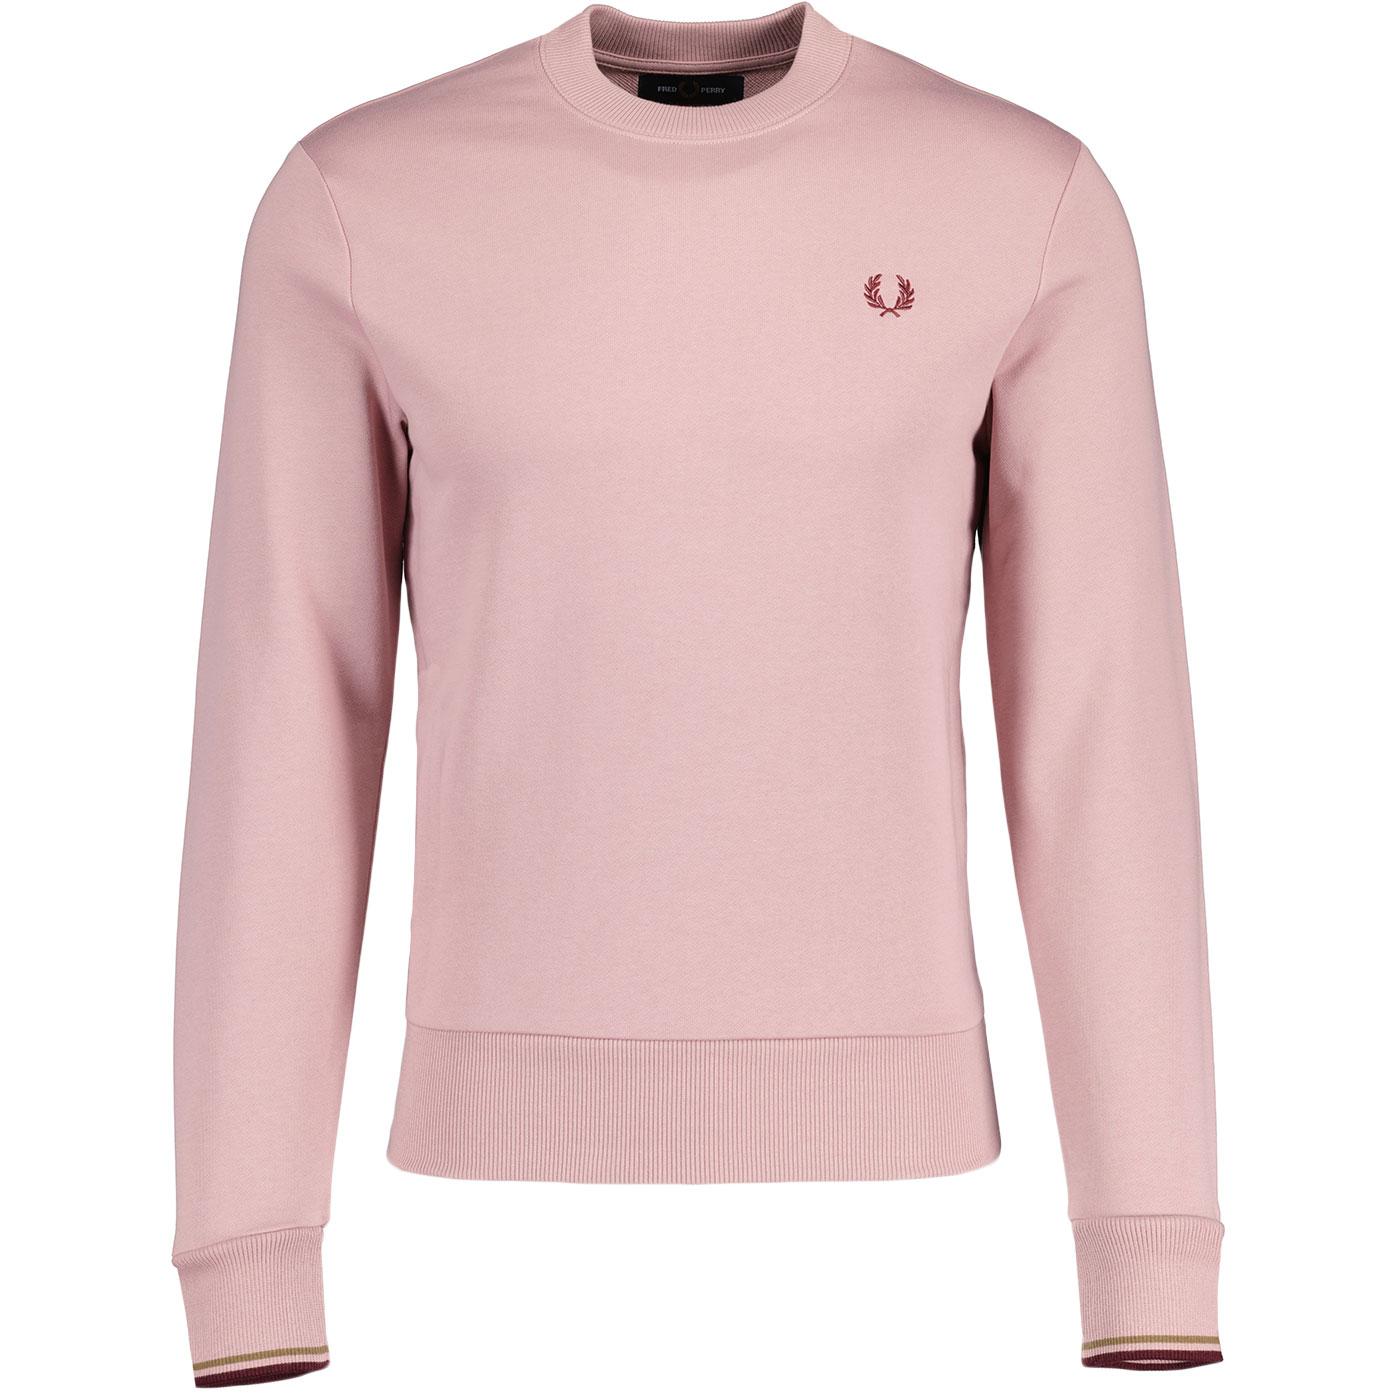 FRED PERRY Classic Mod Crew Neck Sweatshirt Pink